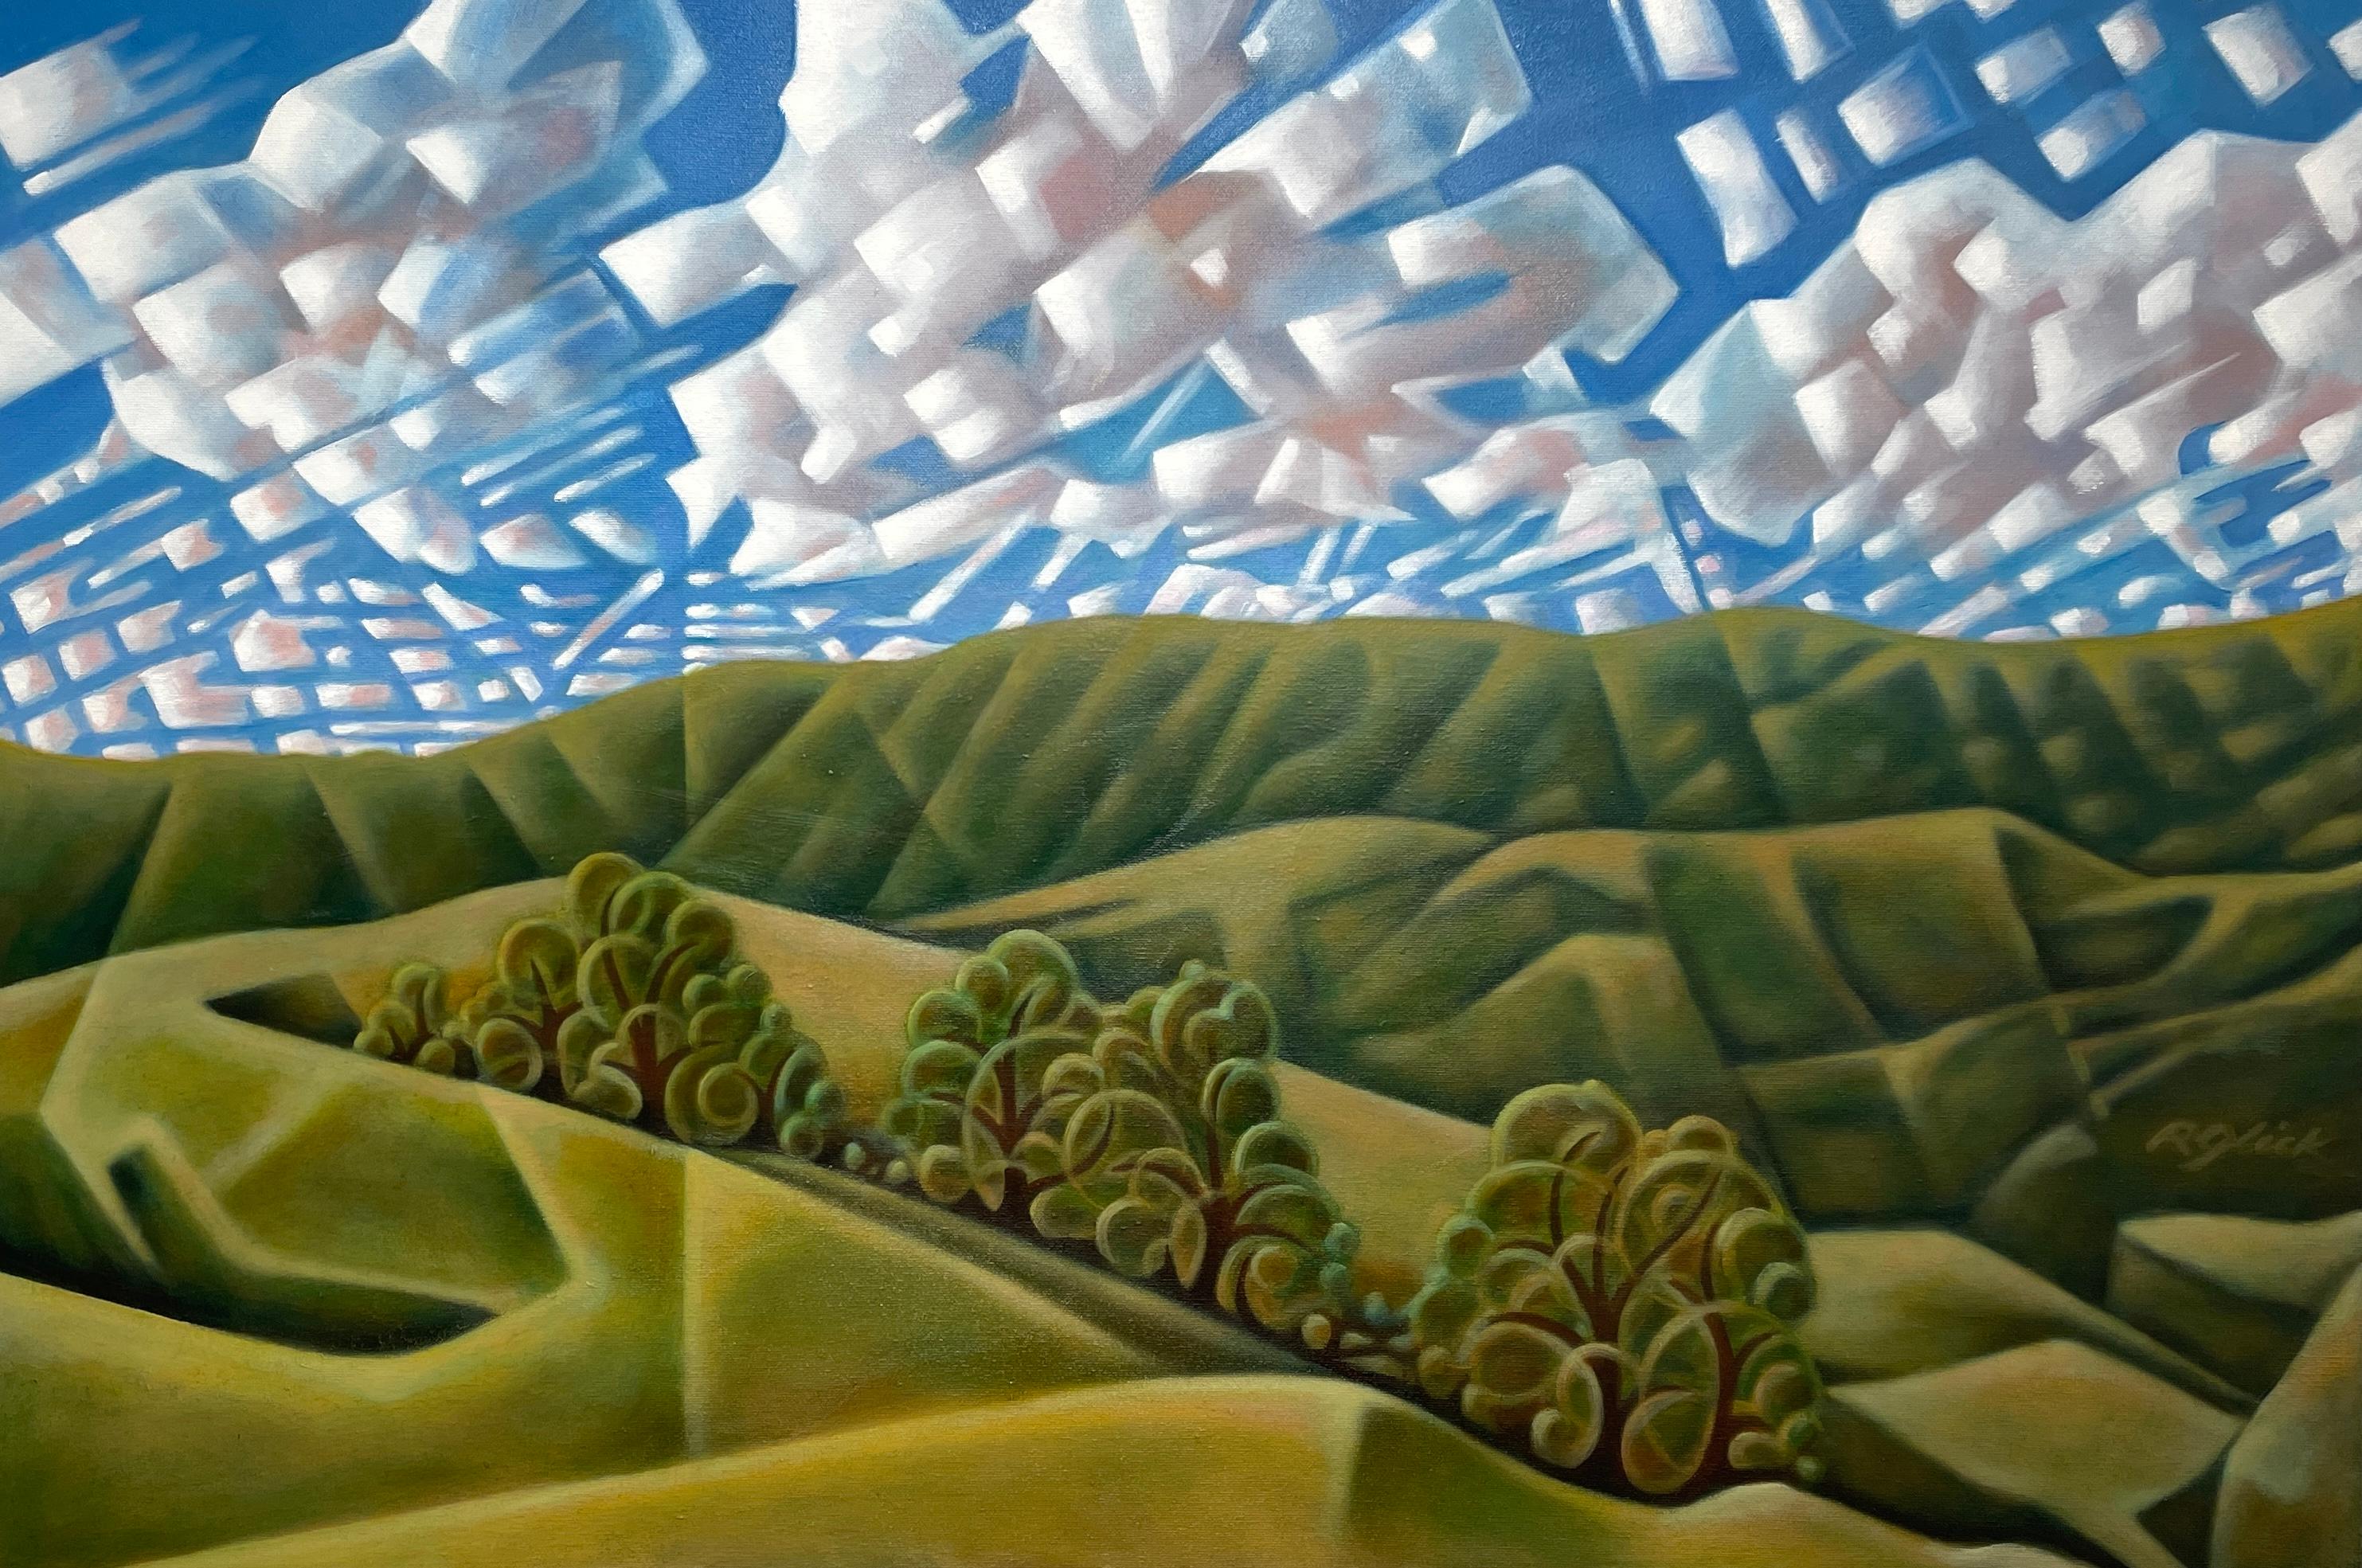 Robert Glick Landscape Painting - 'Clouds and Canyons' - Serene Natural World - Geometric Abstract Landscape